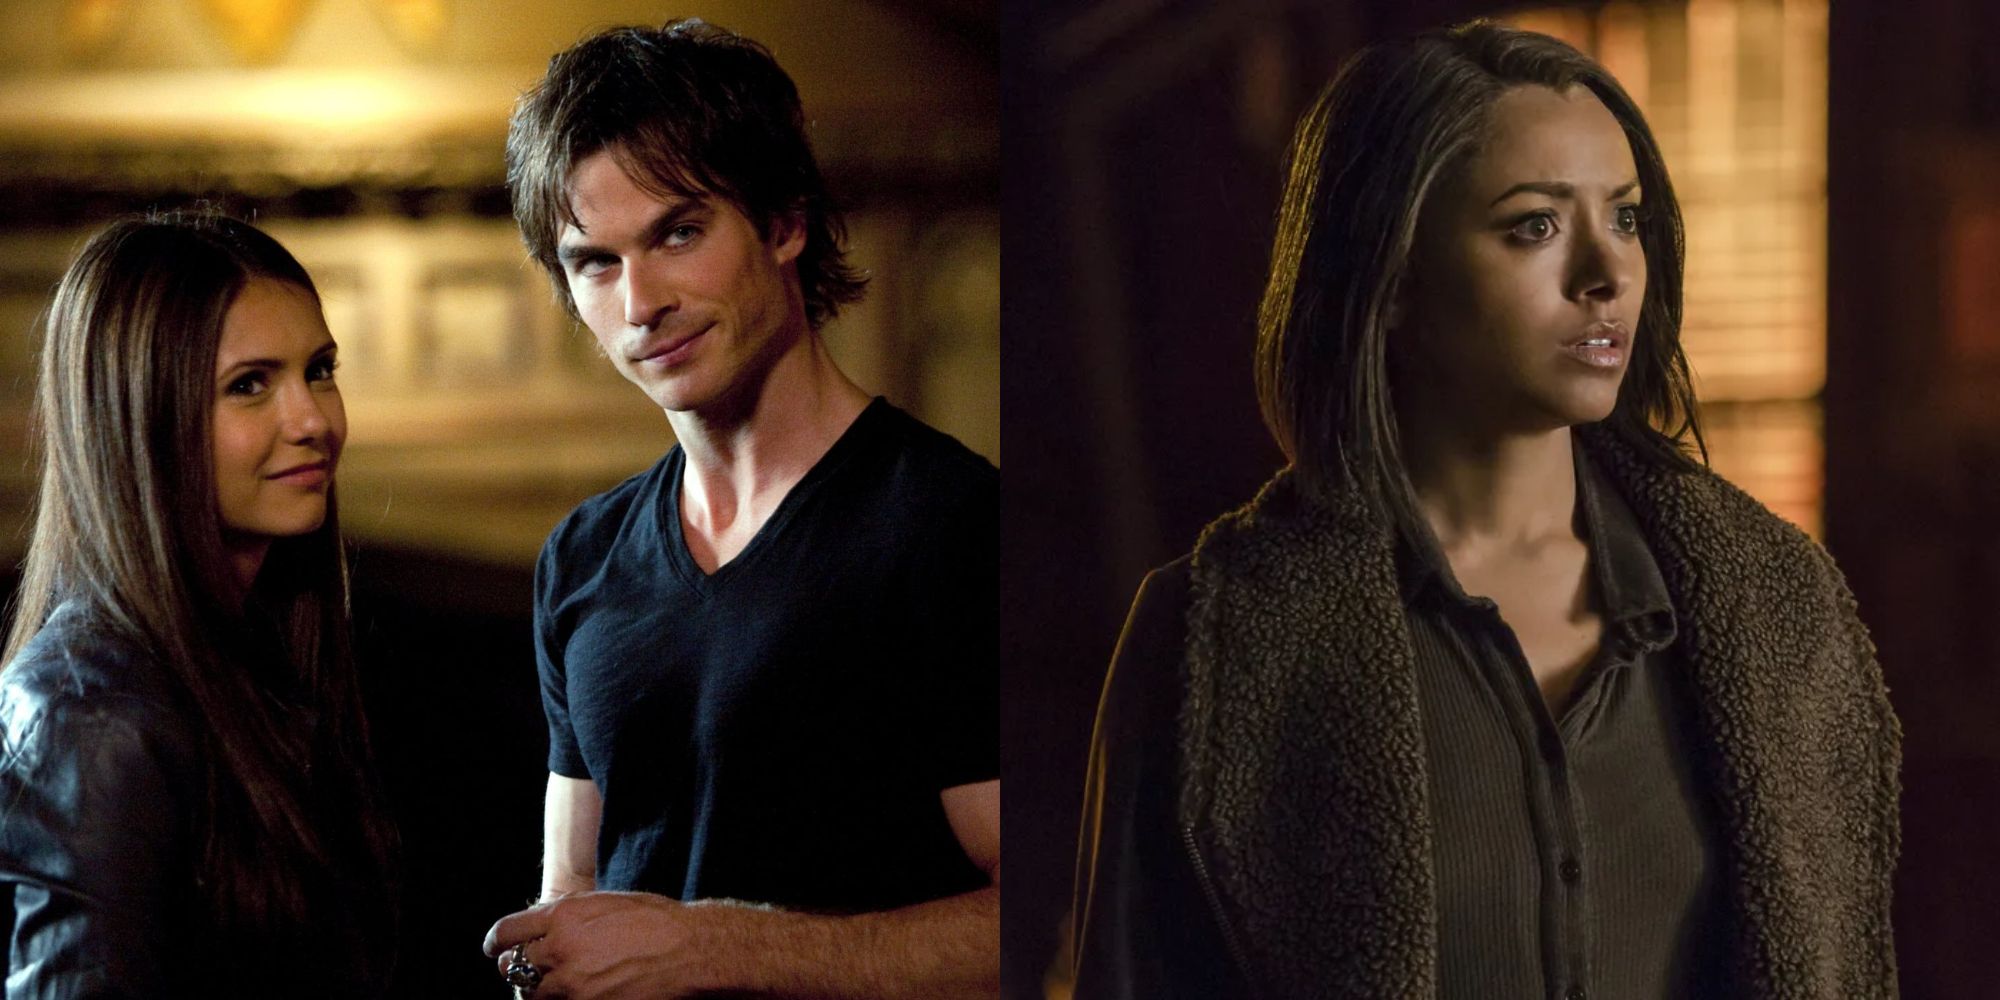 The Vampire Diaries: 10 Biggest Pet Peeves Redditors Have With The Show